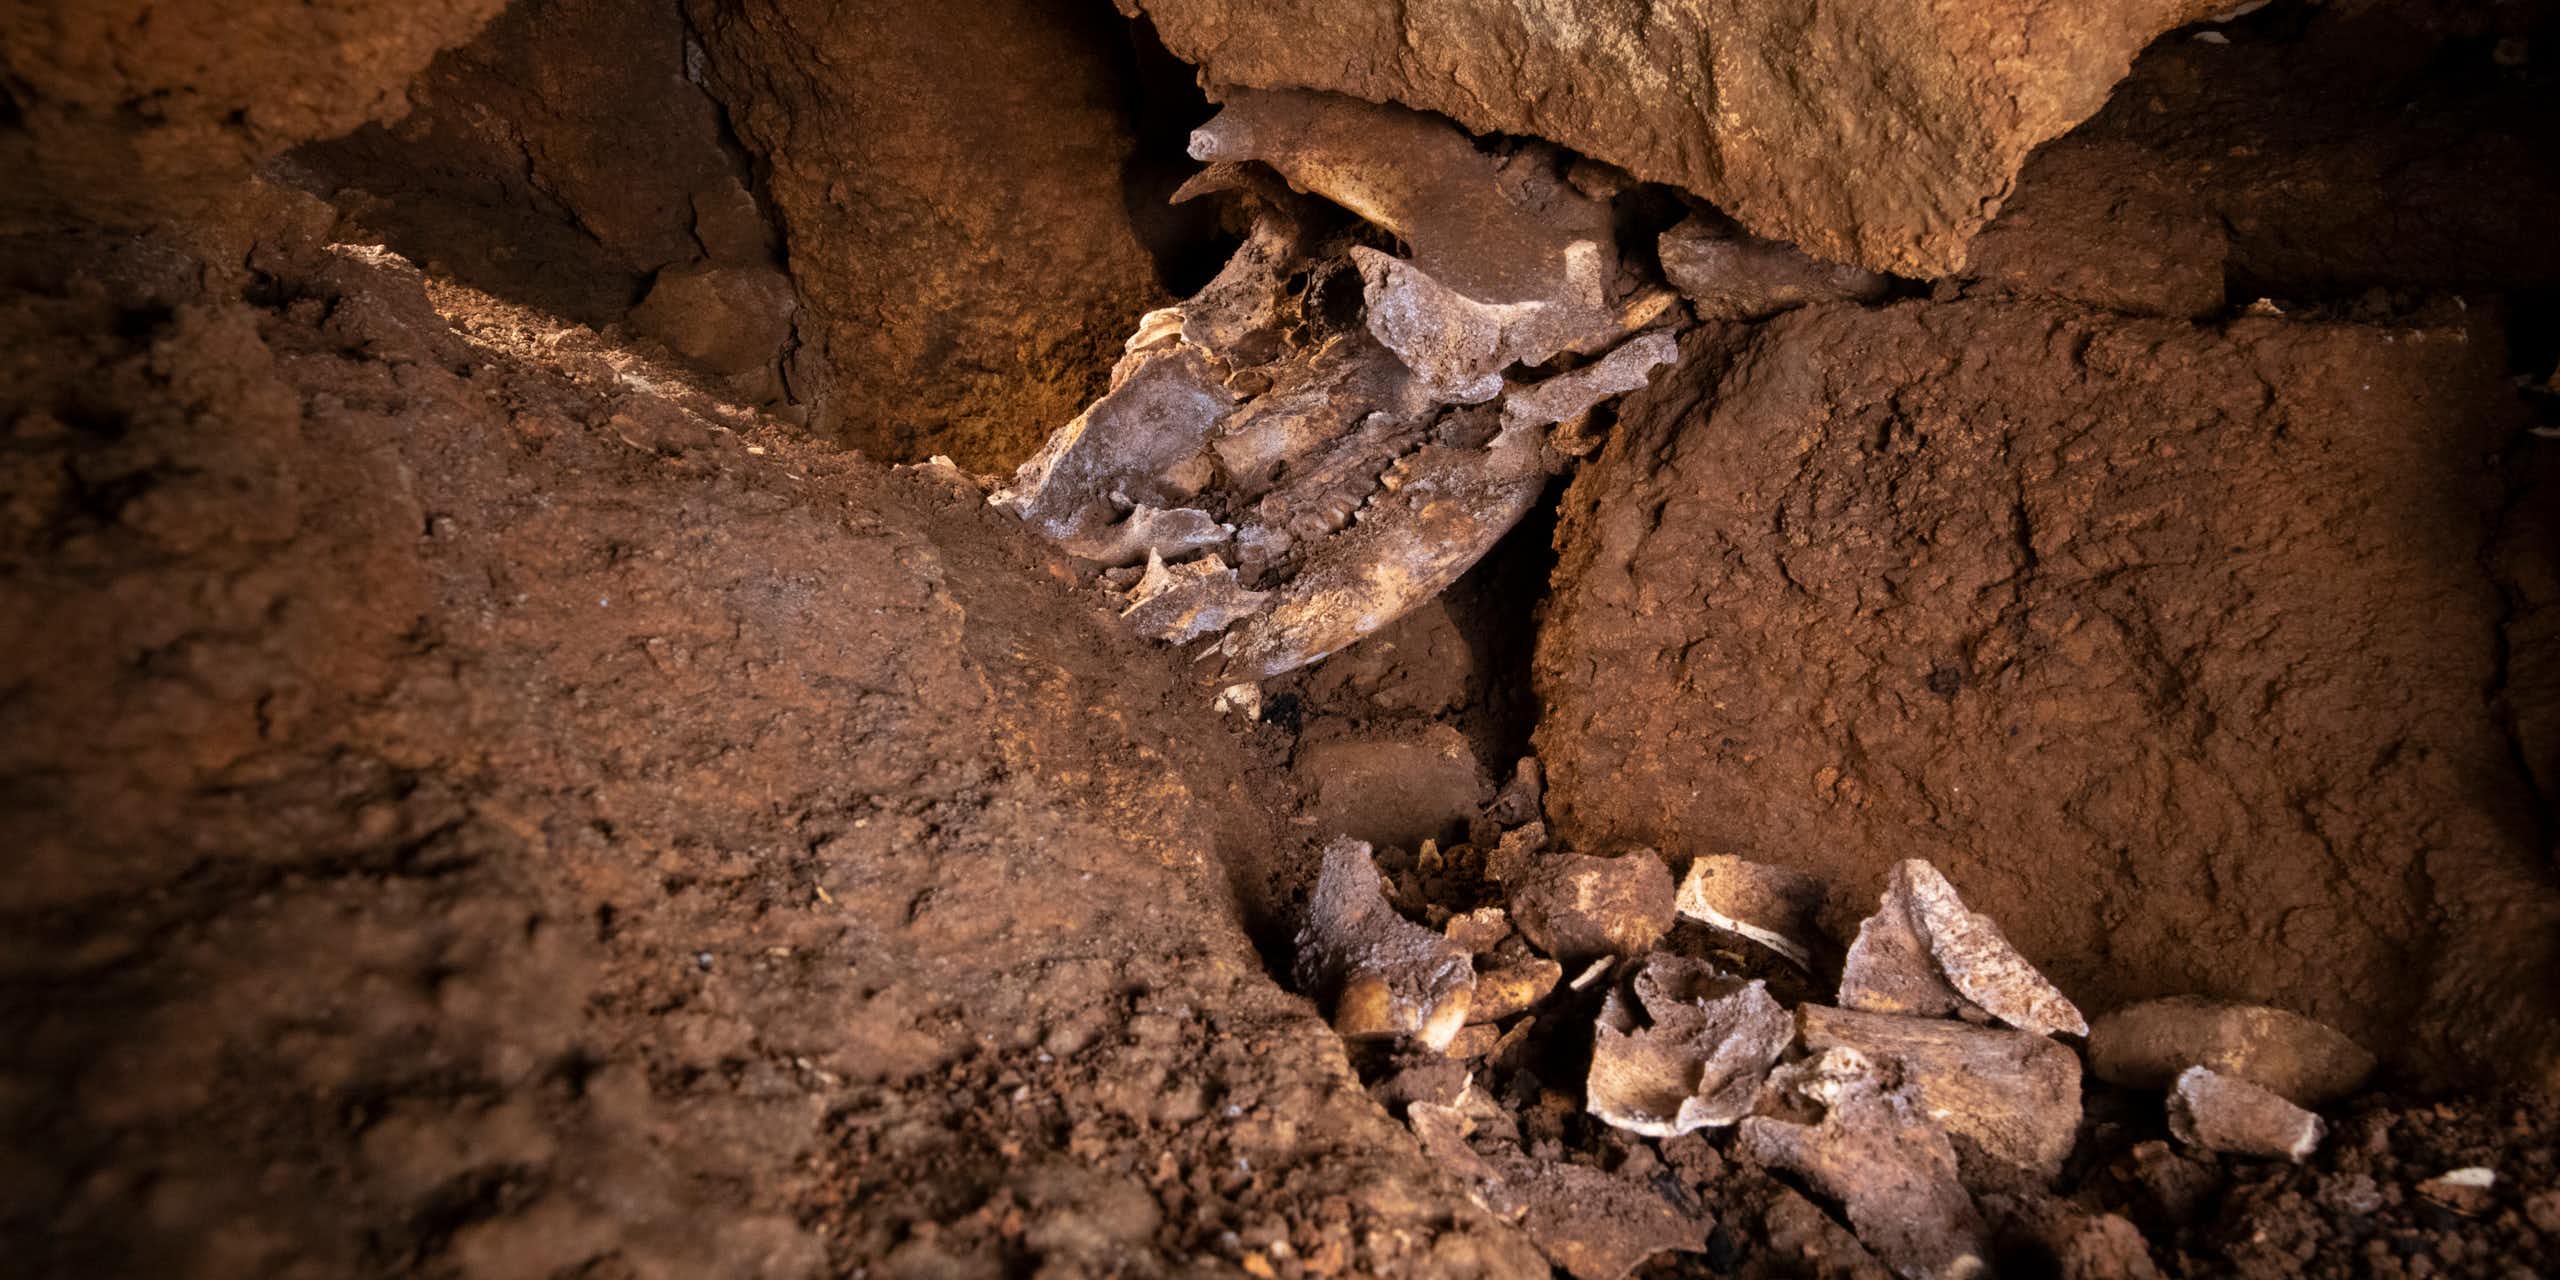 Close-up of bones and a skull sandwiched between brown rocks.